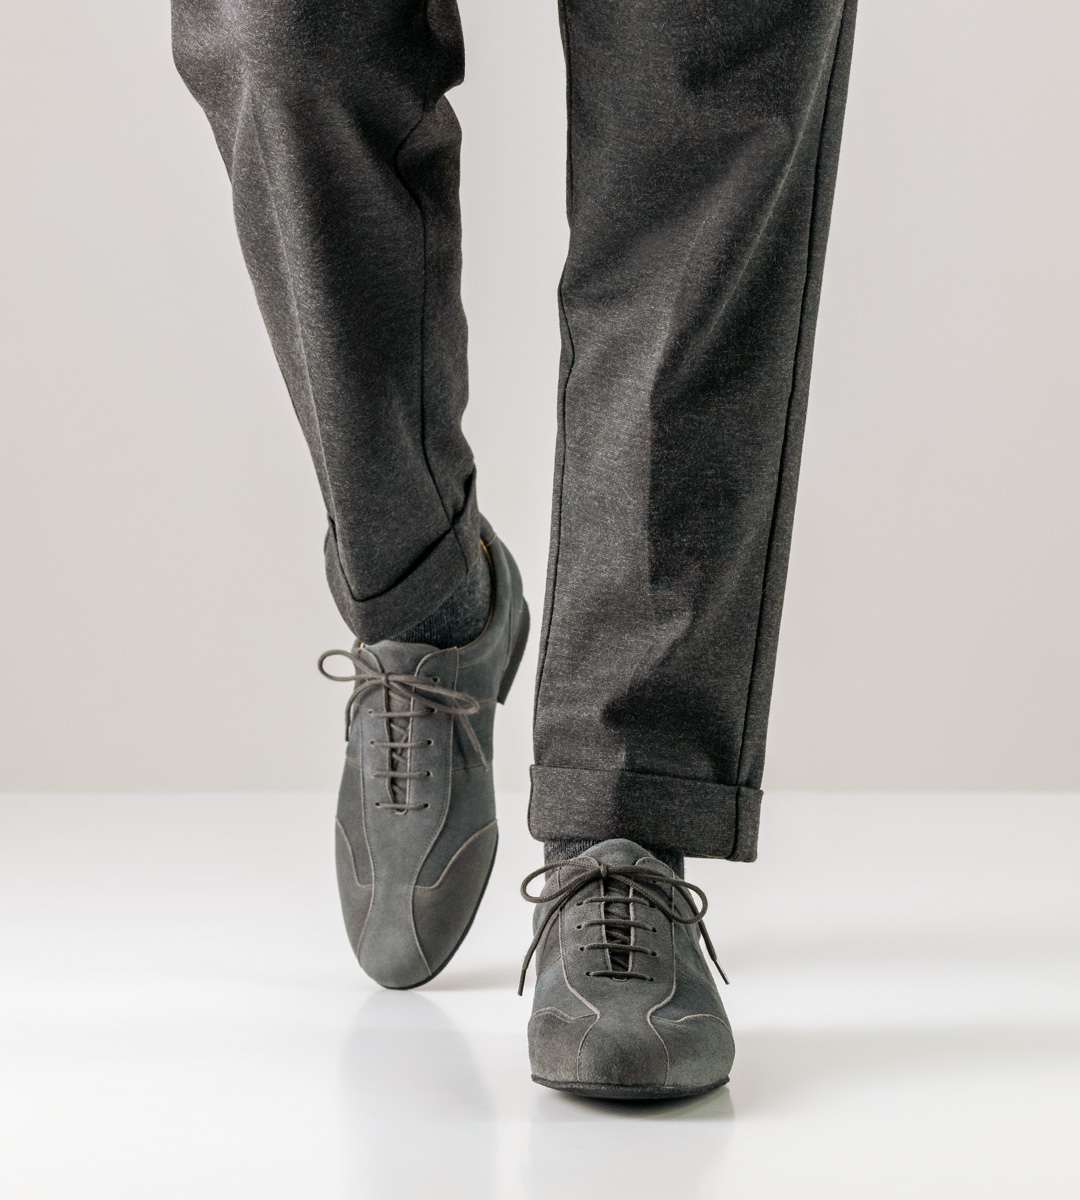 Grey trousers in combination with Sneaker Men's dance shoe by Werner Kern